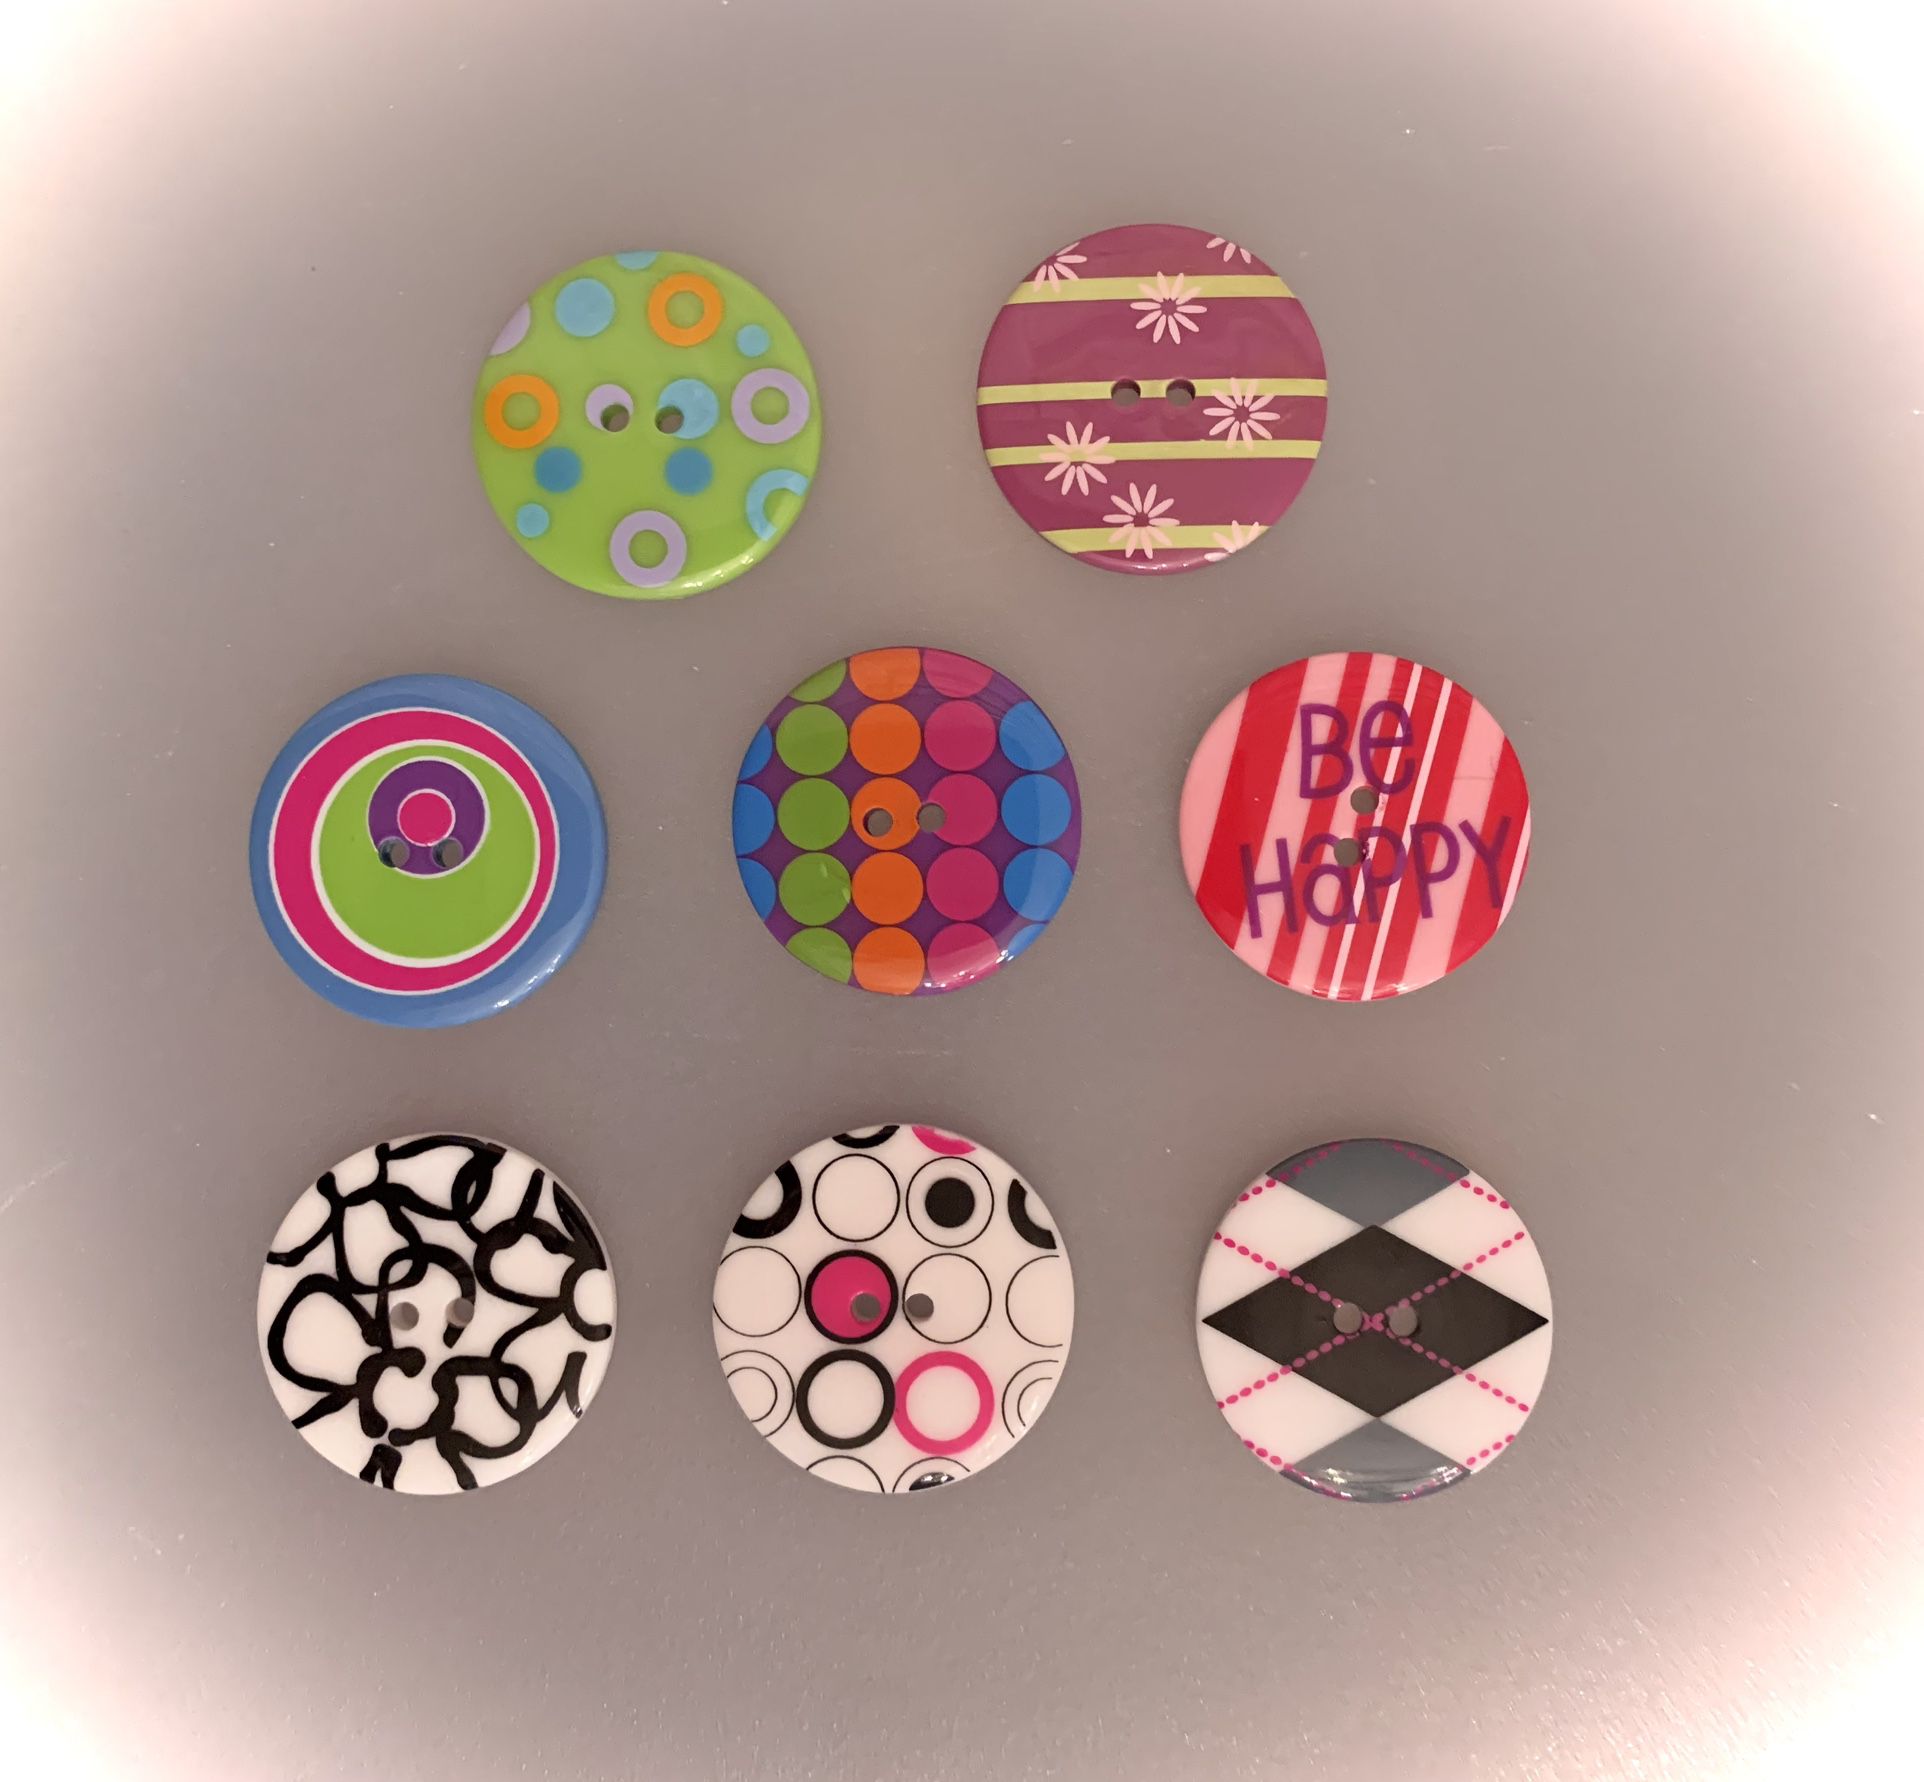 Lot of 8 Fun Buttons 1 3/8”.  #041624A3